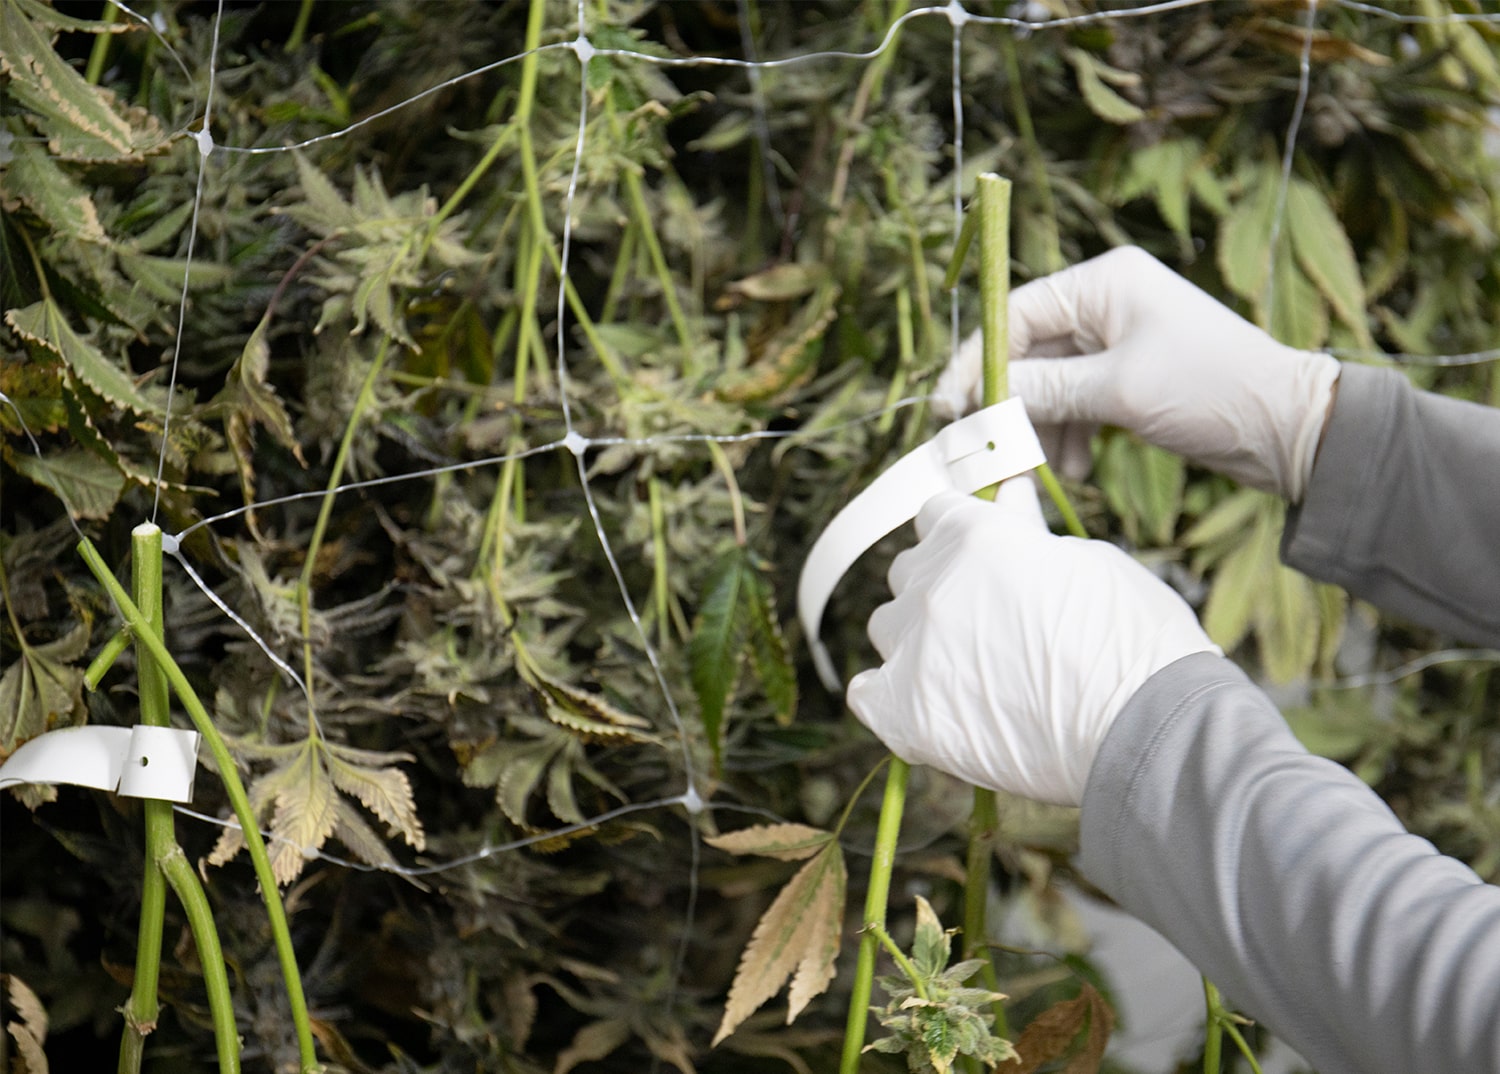 close up of worker hanging cannabis to dry and cure